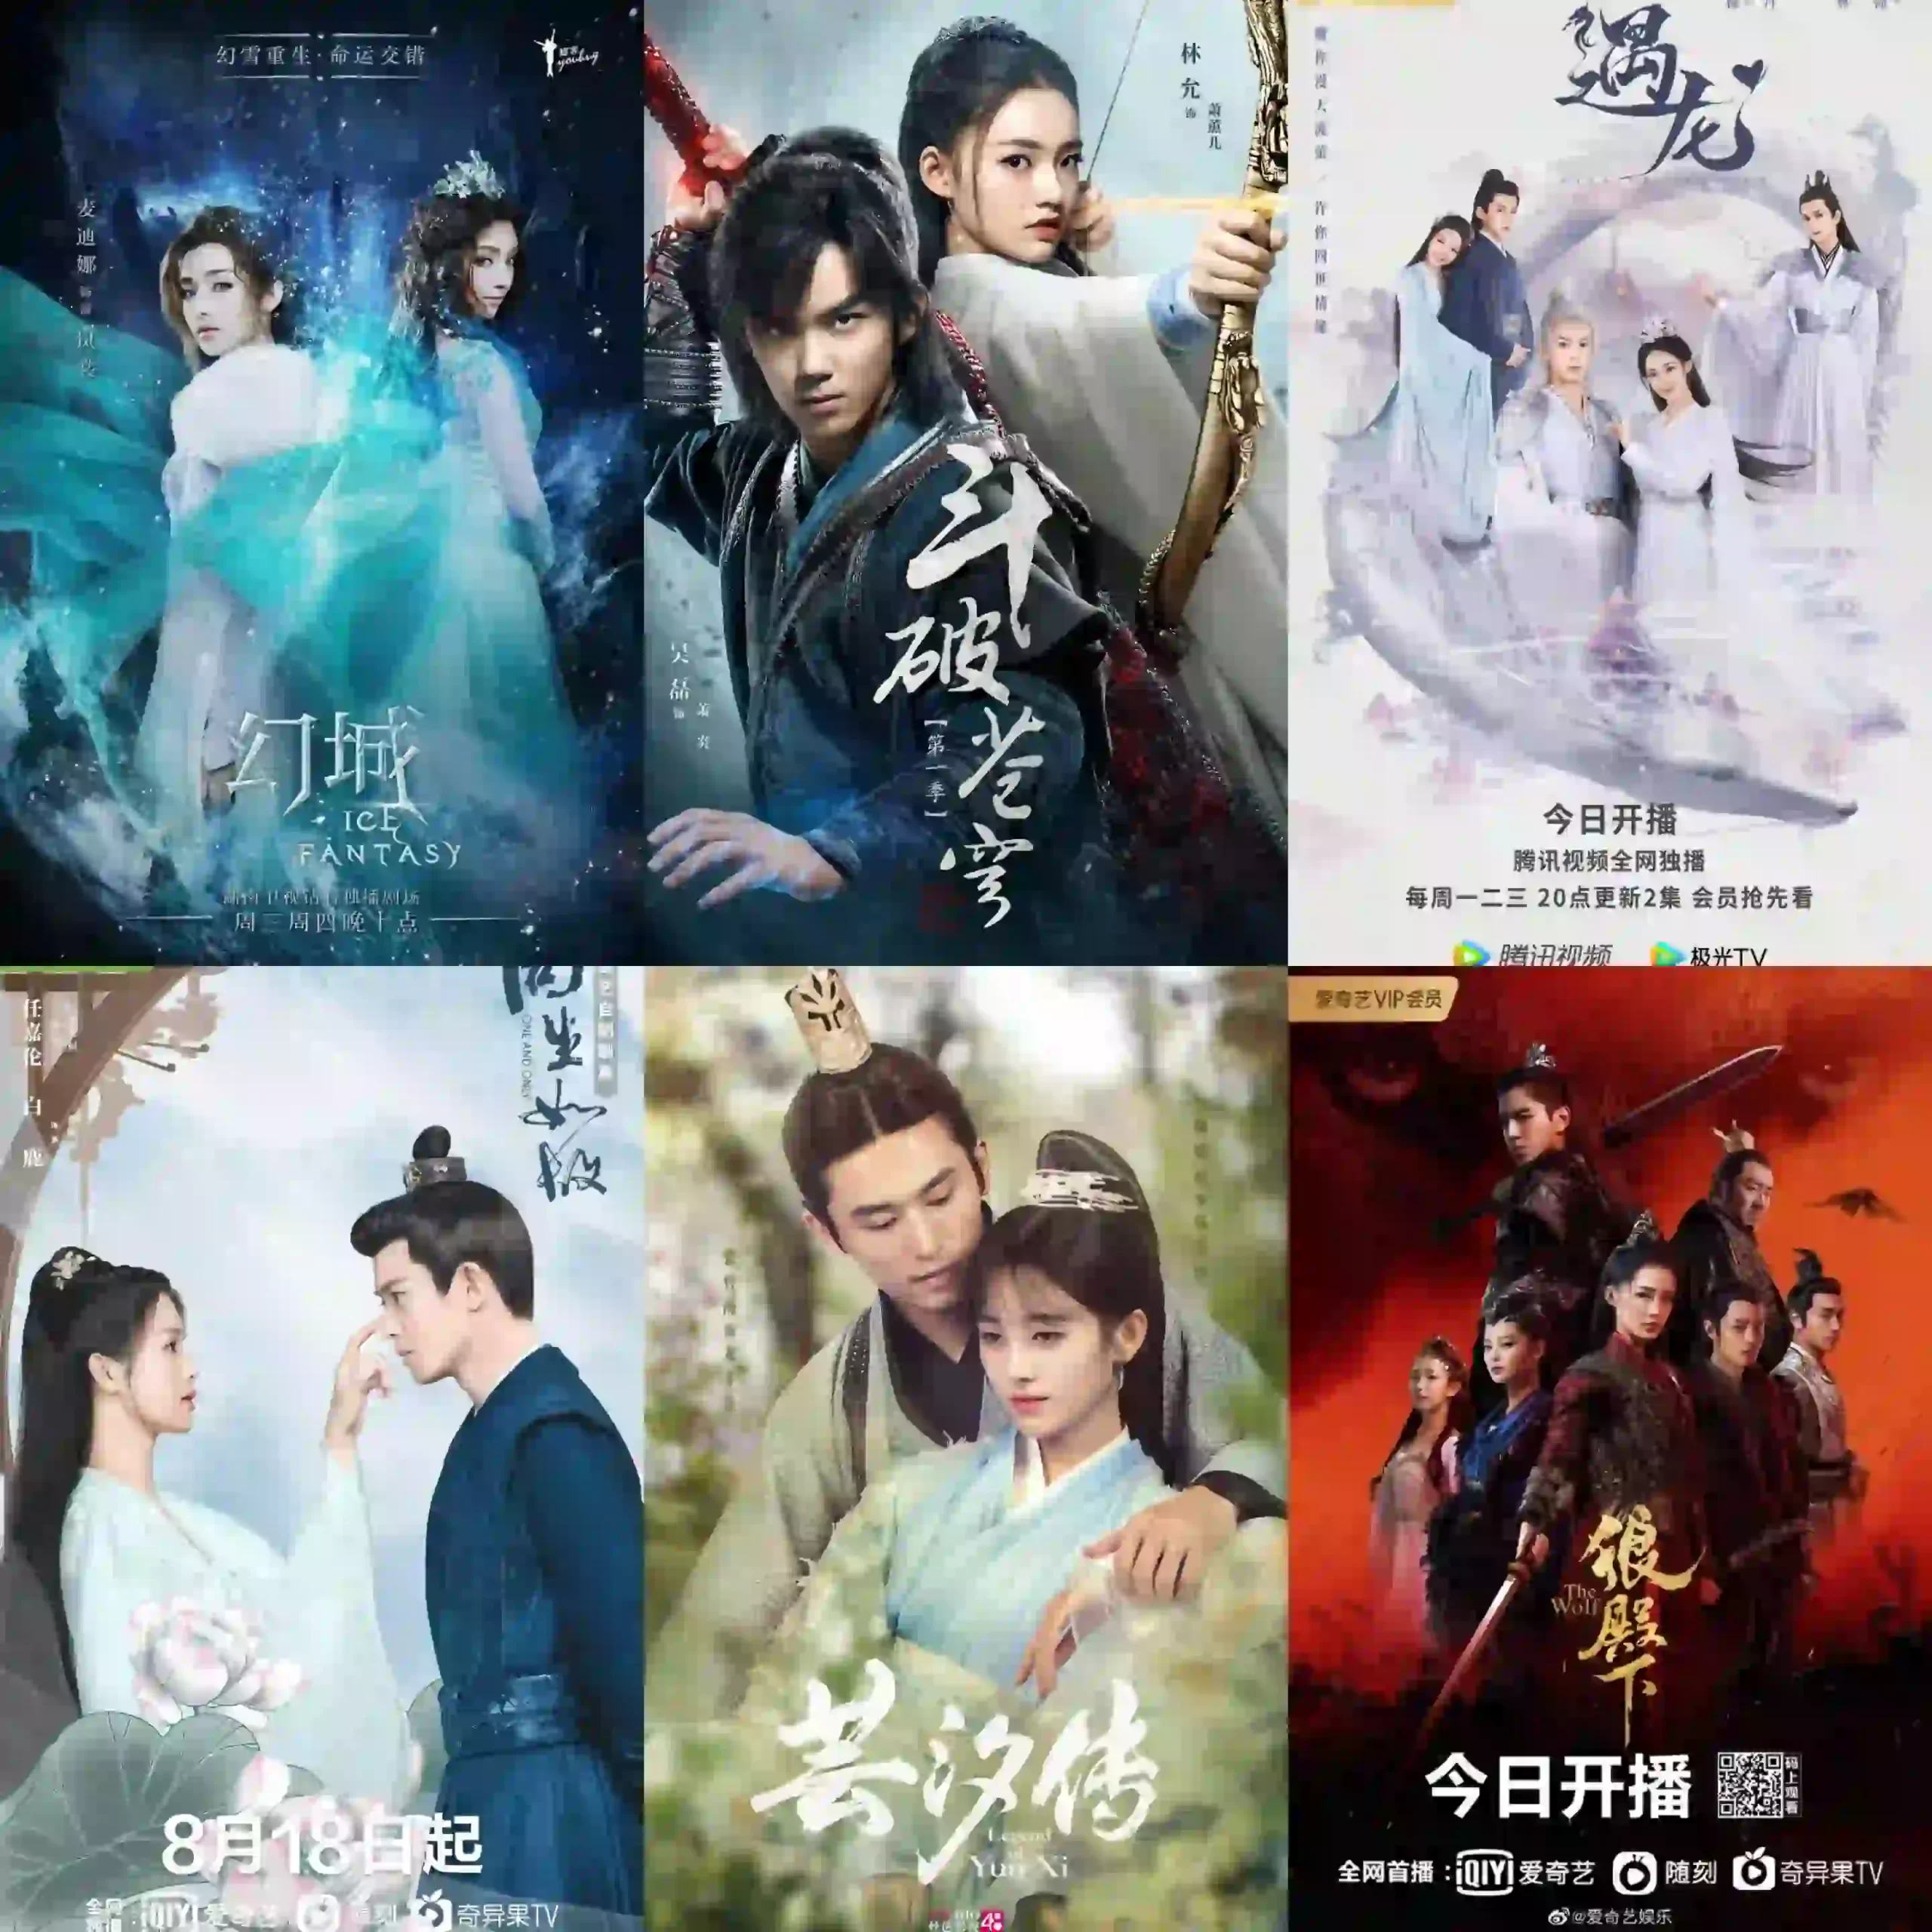 Most interesting wuxia Chinese drama to watch